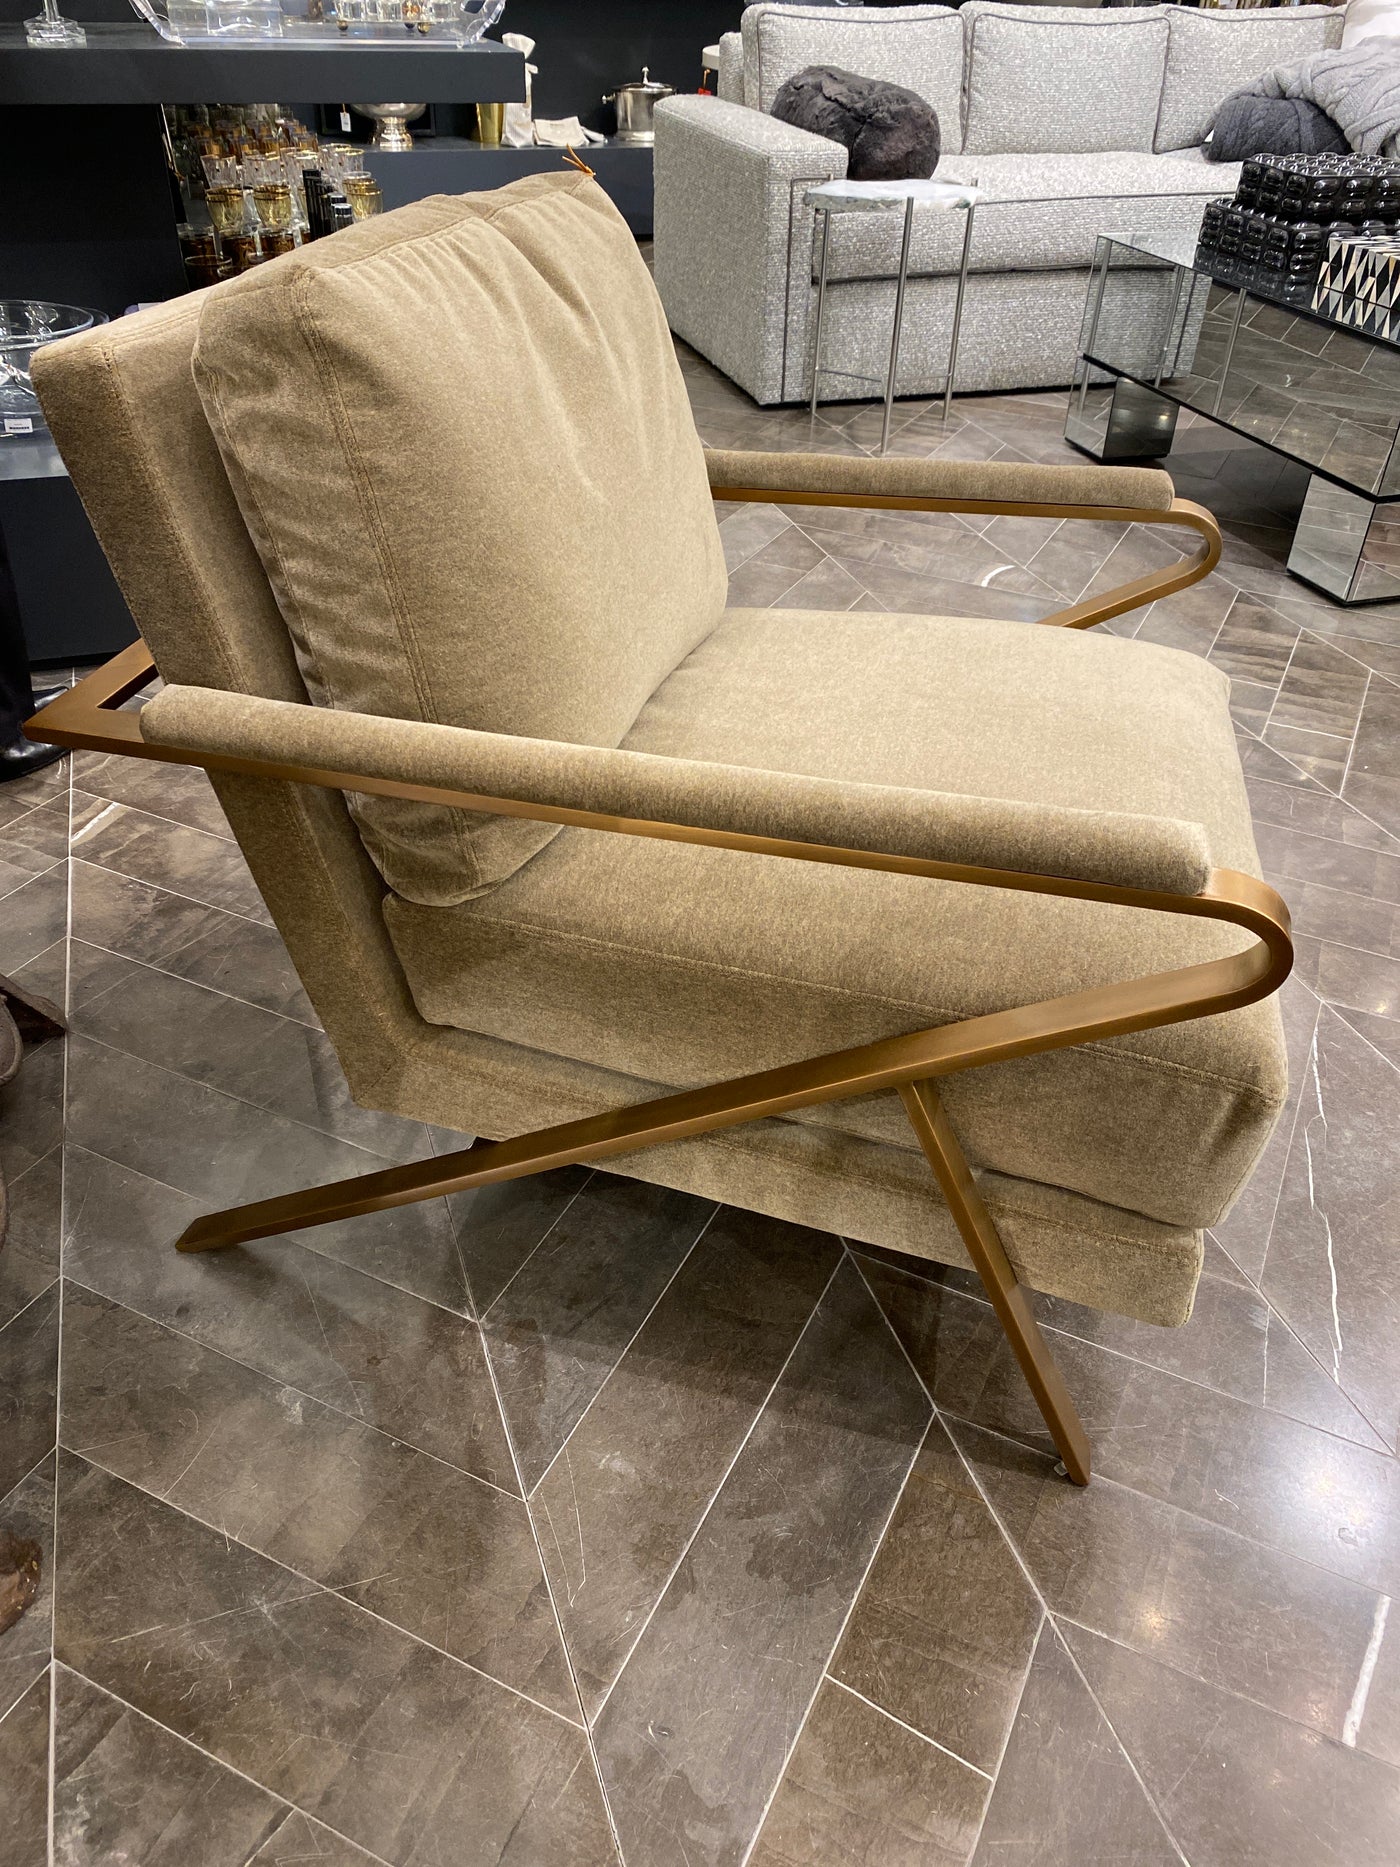 CHAIR WITH BRASS FRAME IN FLANDERS KHAKI FABRIC